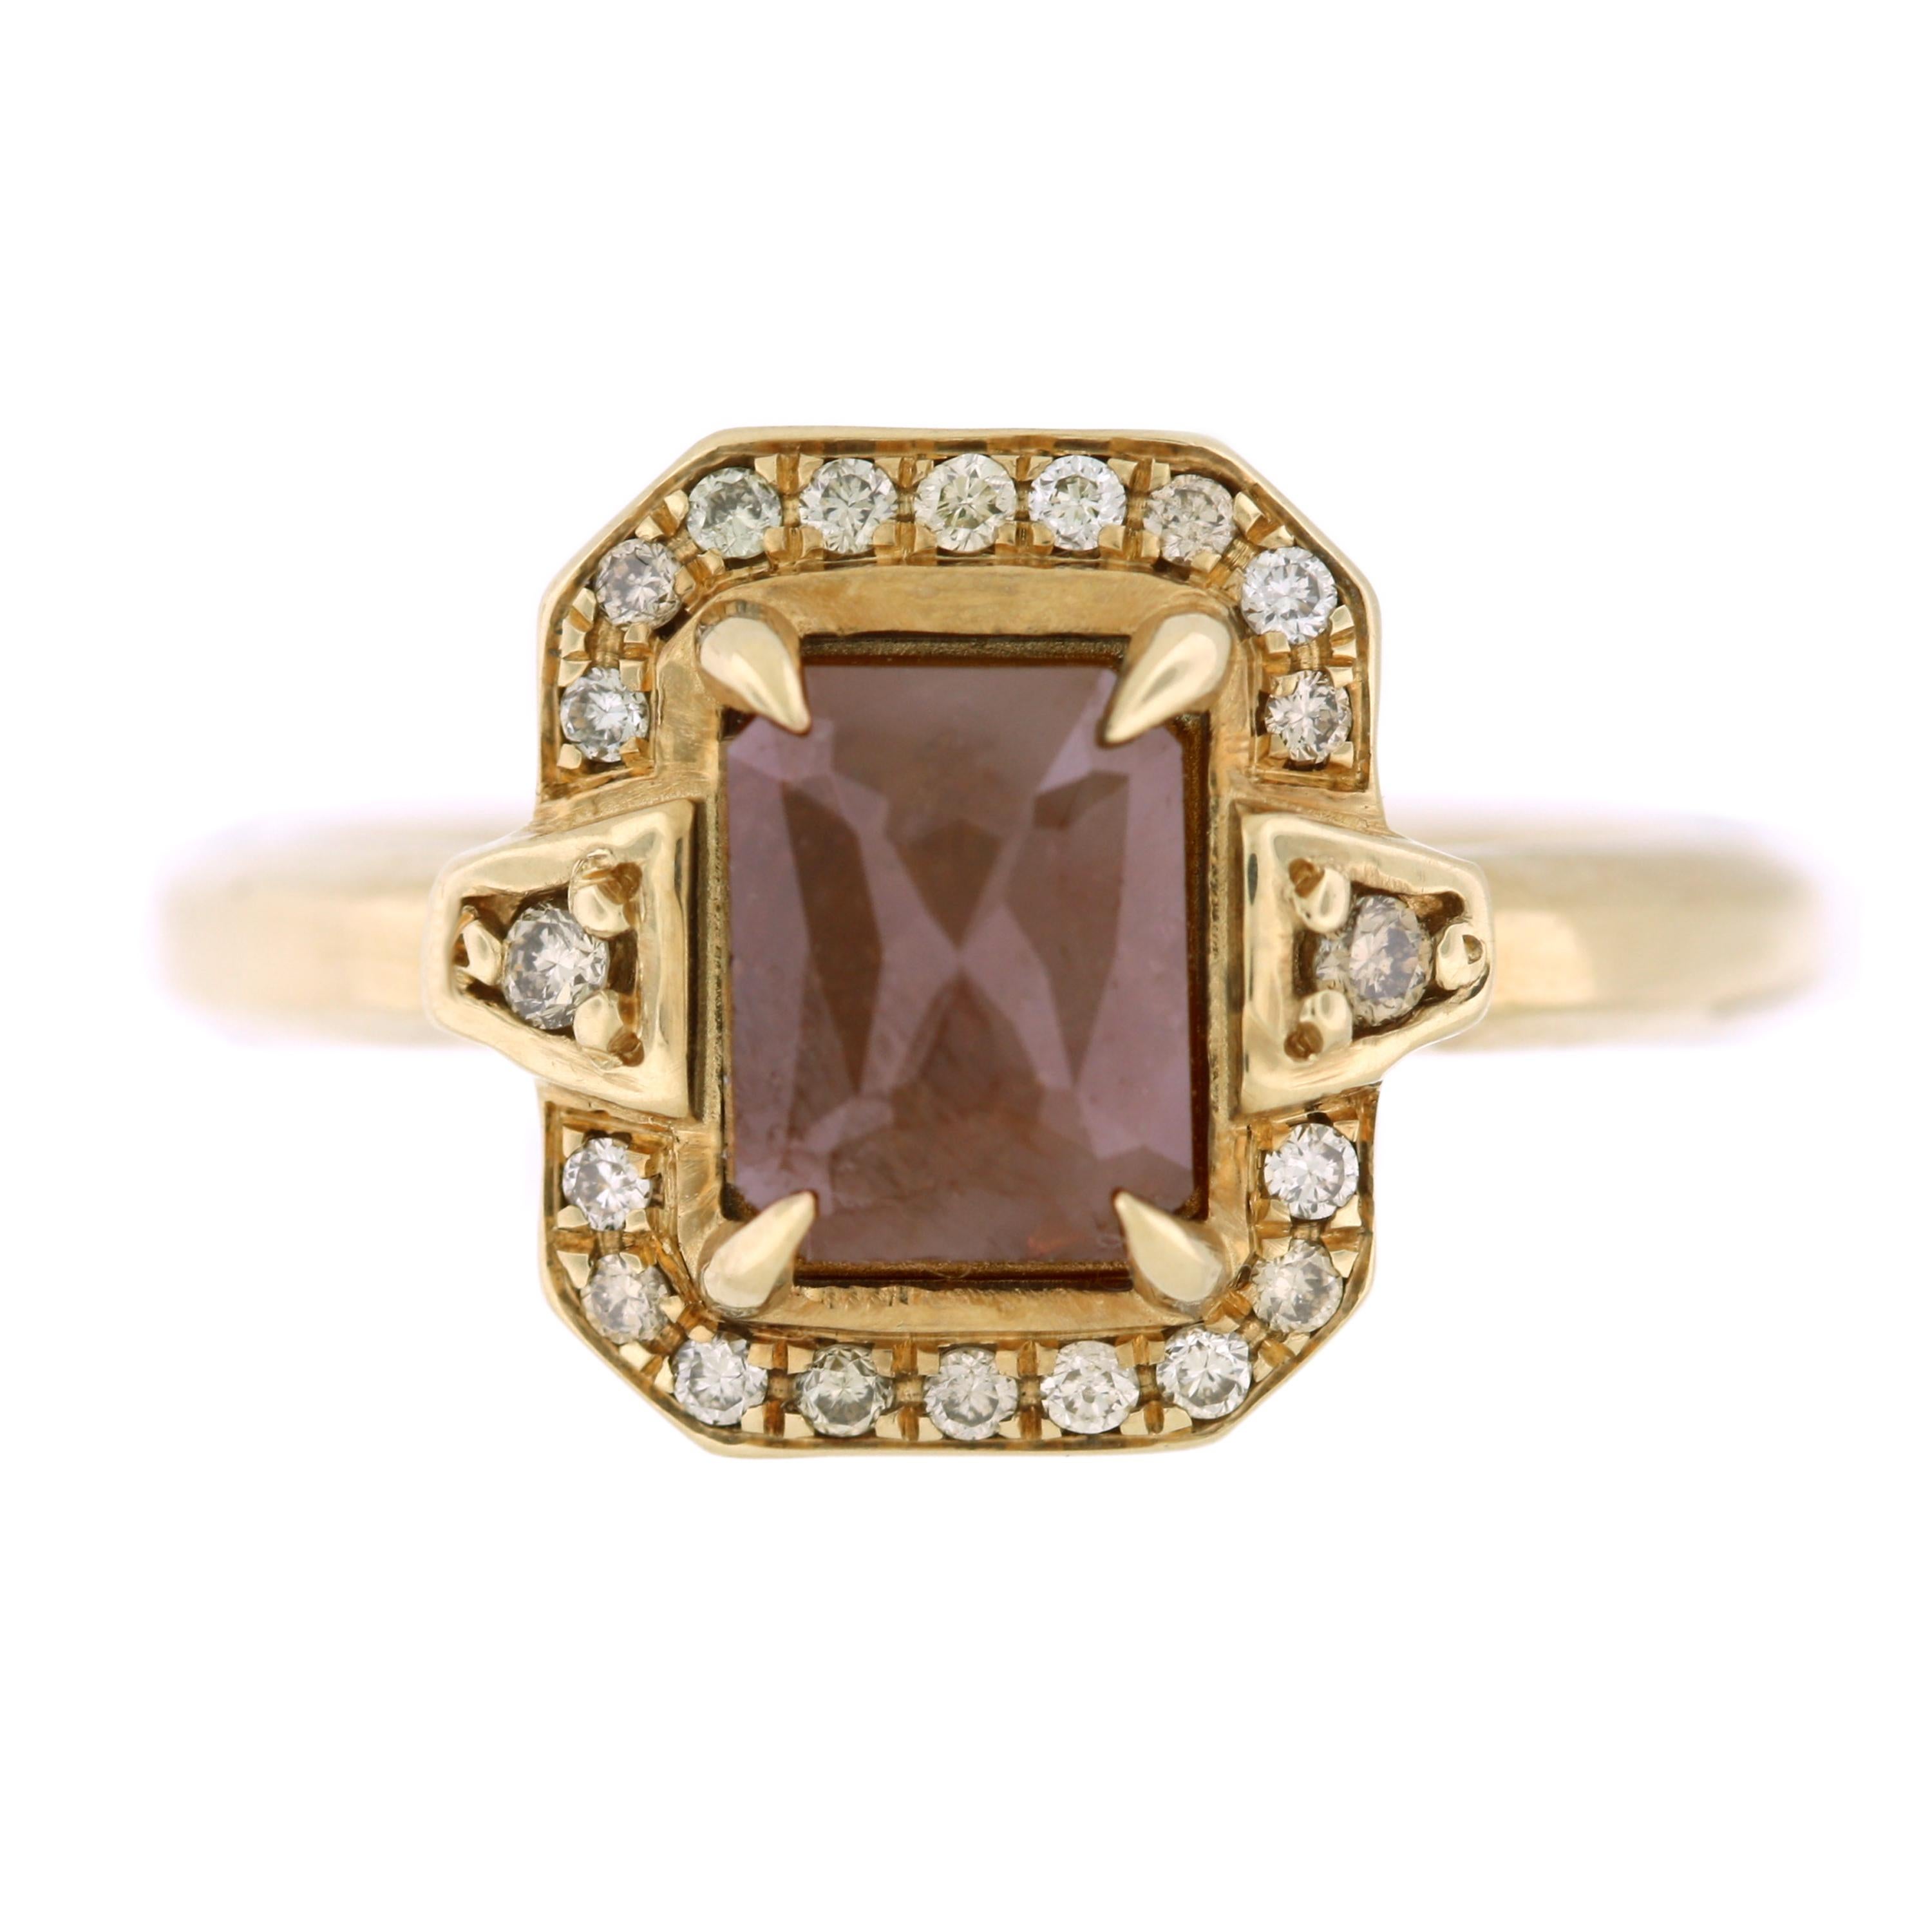 Aimee Kennedy, 1 Carat Rose Cut Brown Diamond Halo Ring For Sale